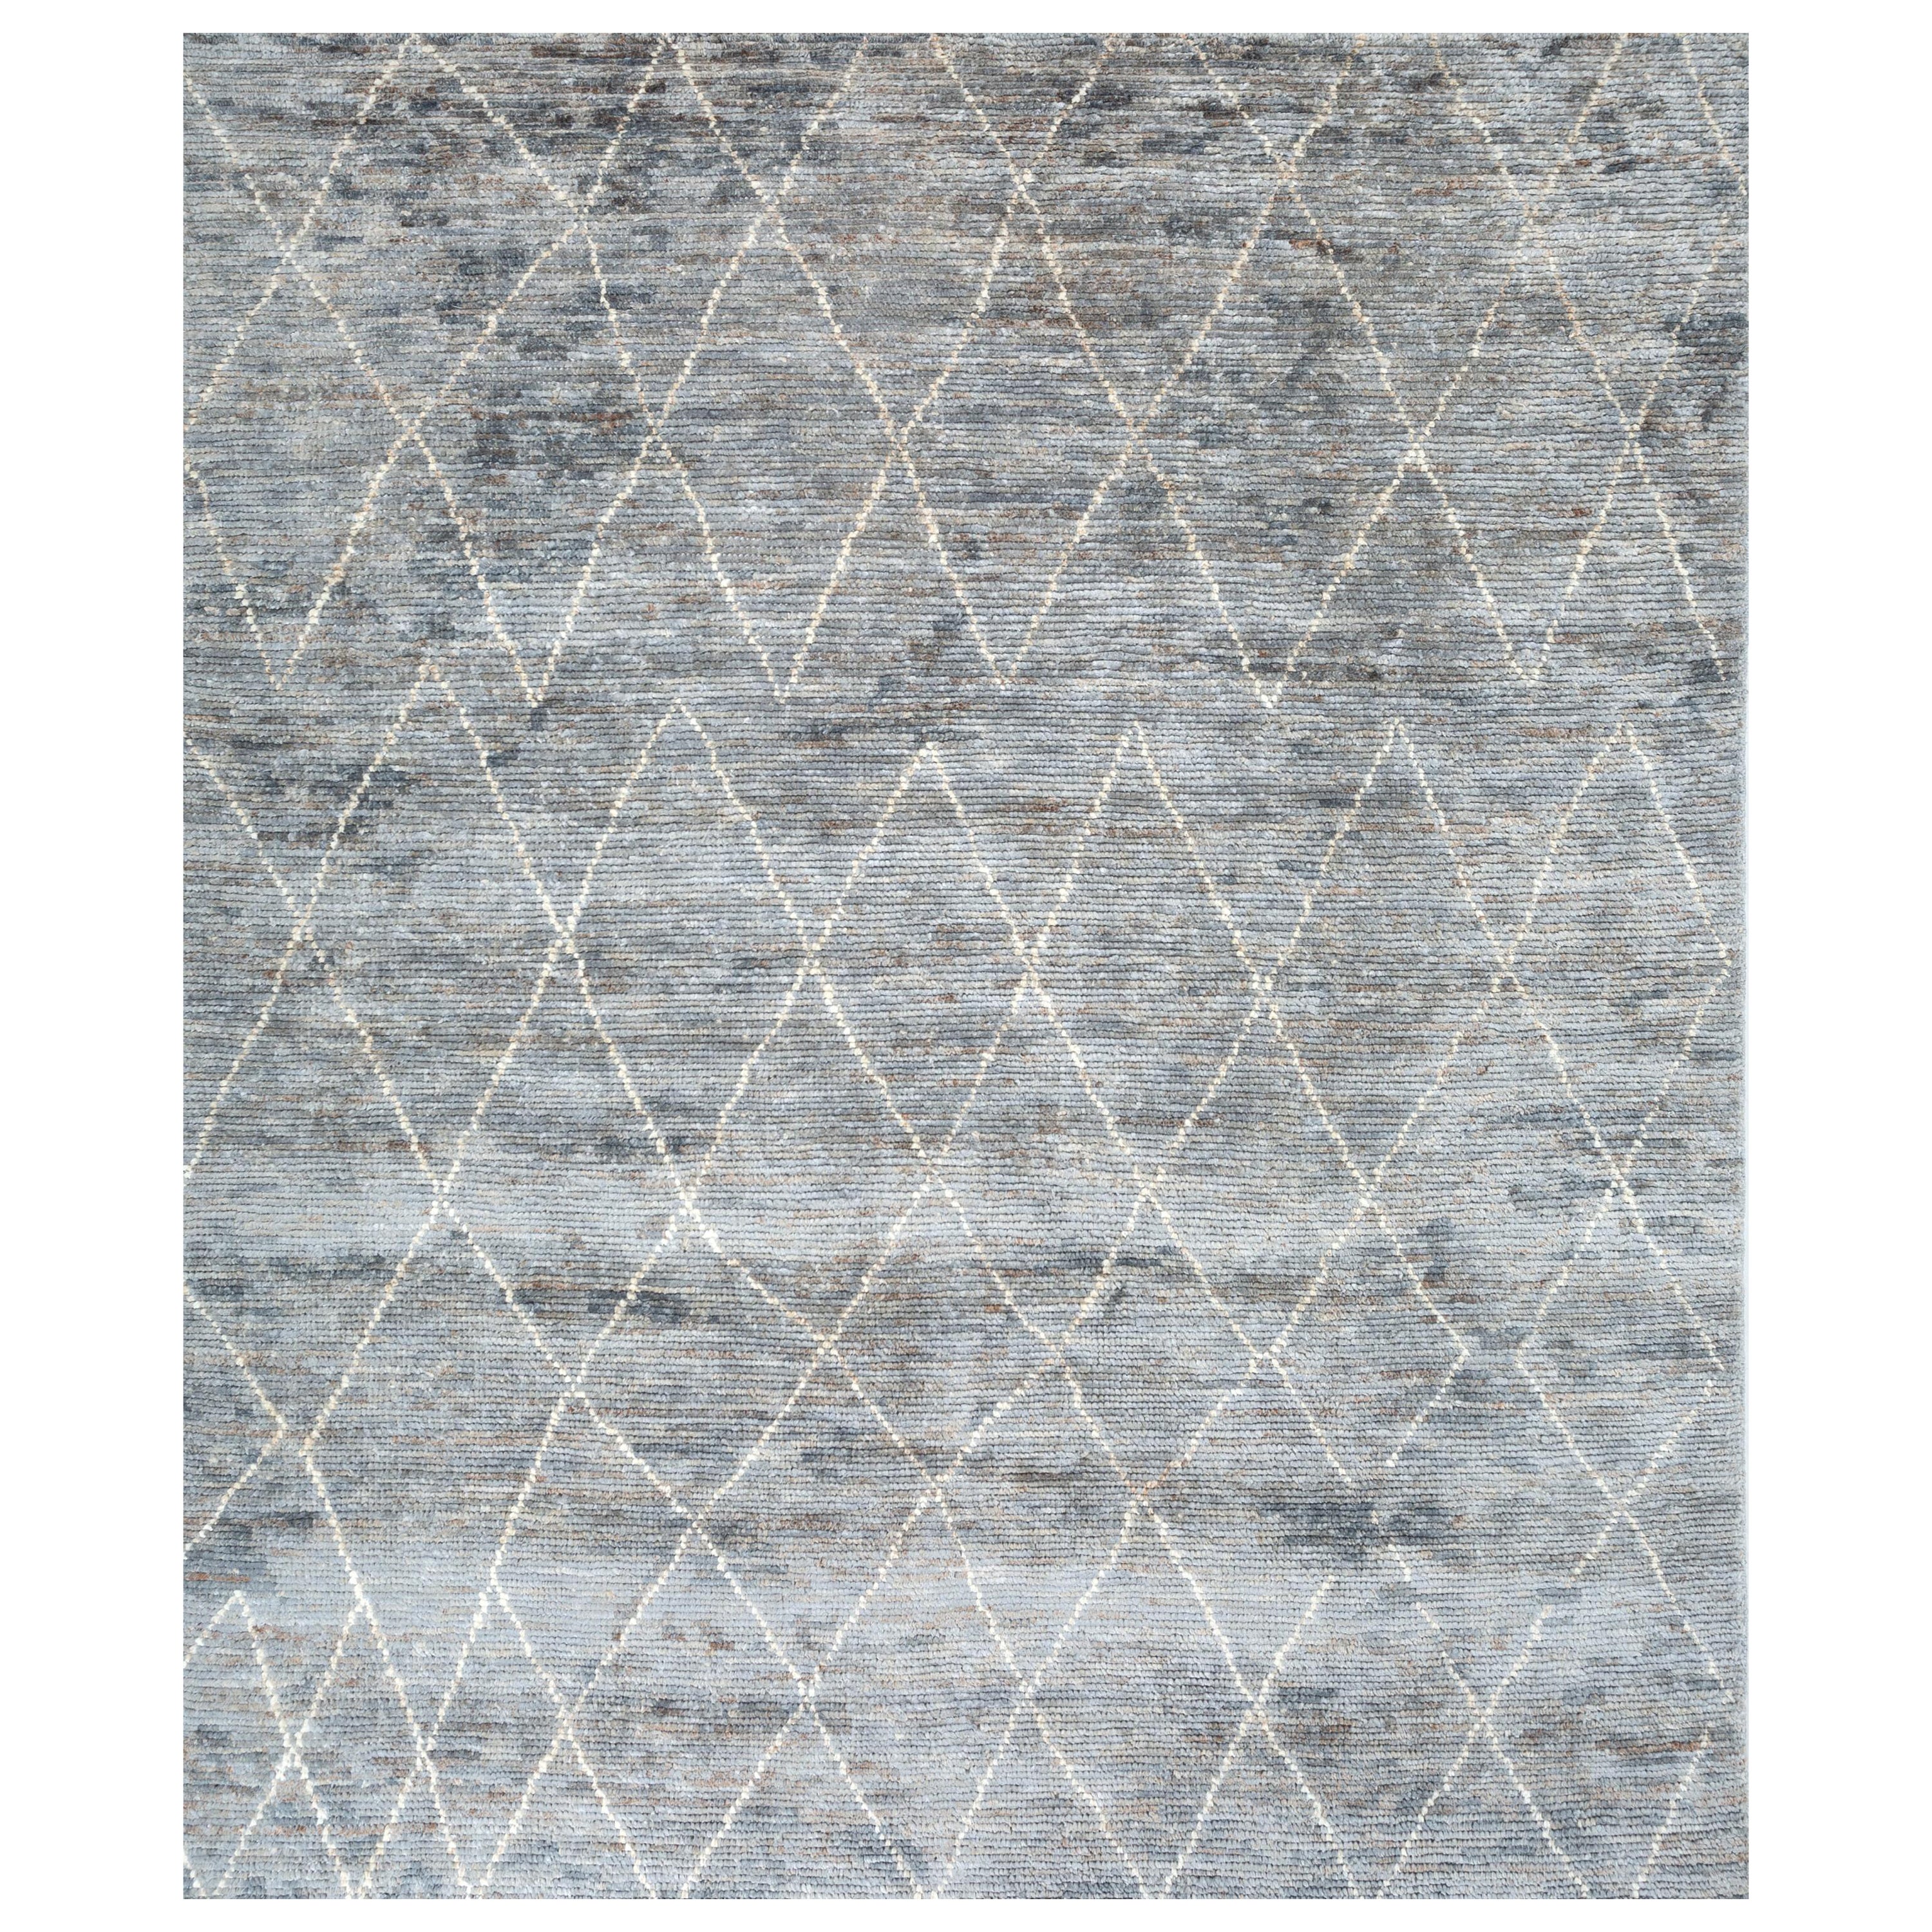 Cultural Mosaic Glacier Gray & White 240X300 cm Hand-Knotted Rug For Sale